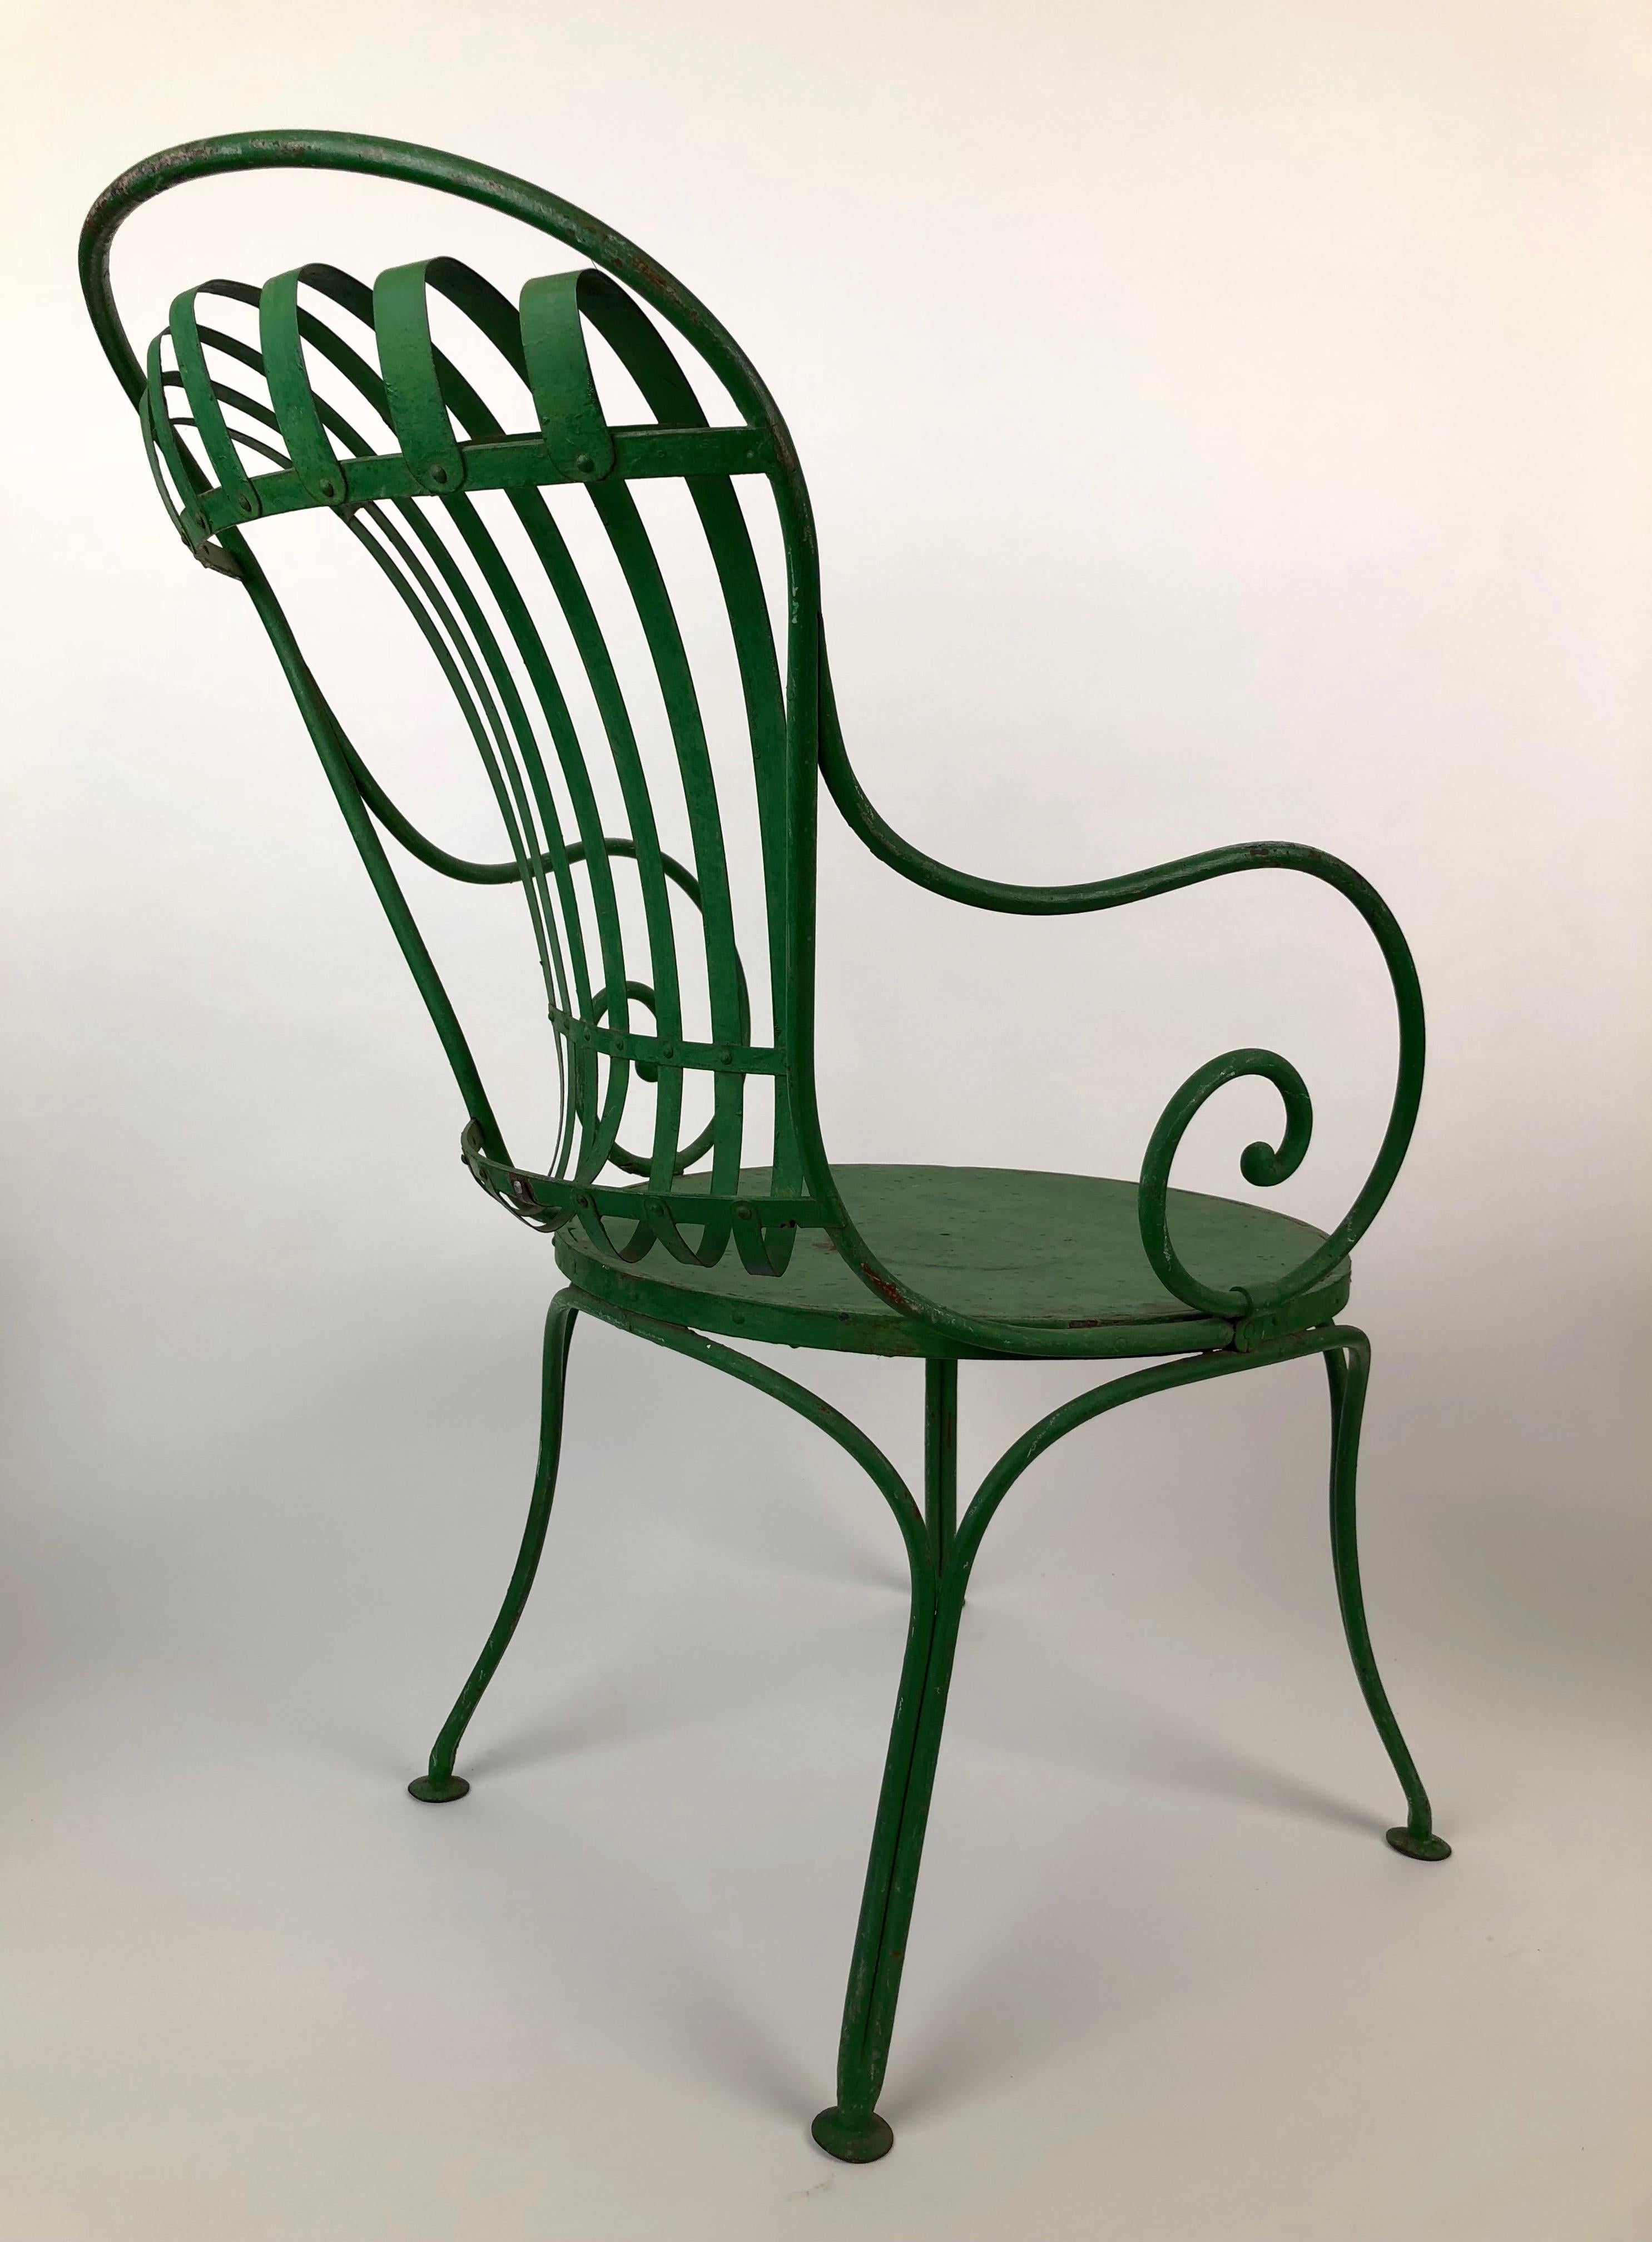 An unusual pair of green, 1930s French metal garden chairs from Francois Carre. They feature a solid steel seat with a spring steel fan back, the color is original with a wonderful patina. The frame of the chair is wrought iron. They are in original